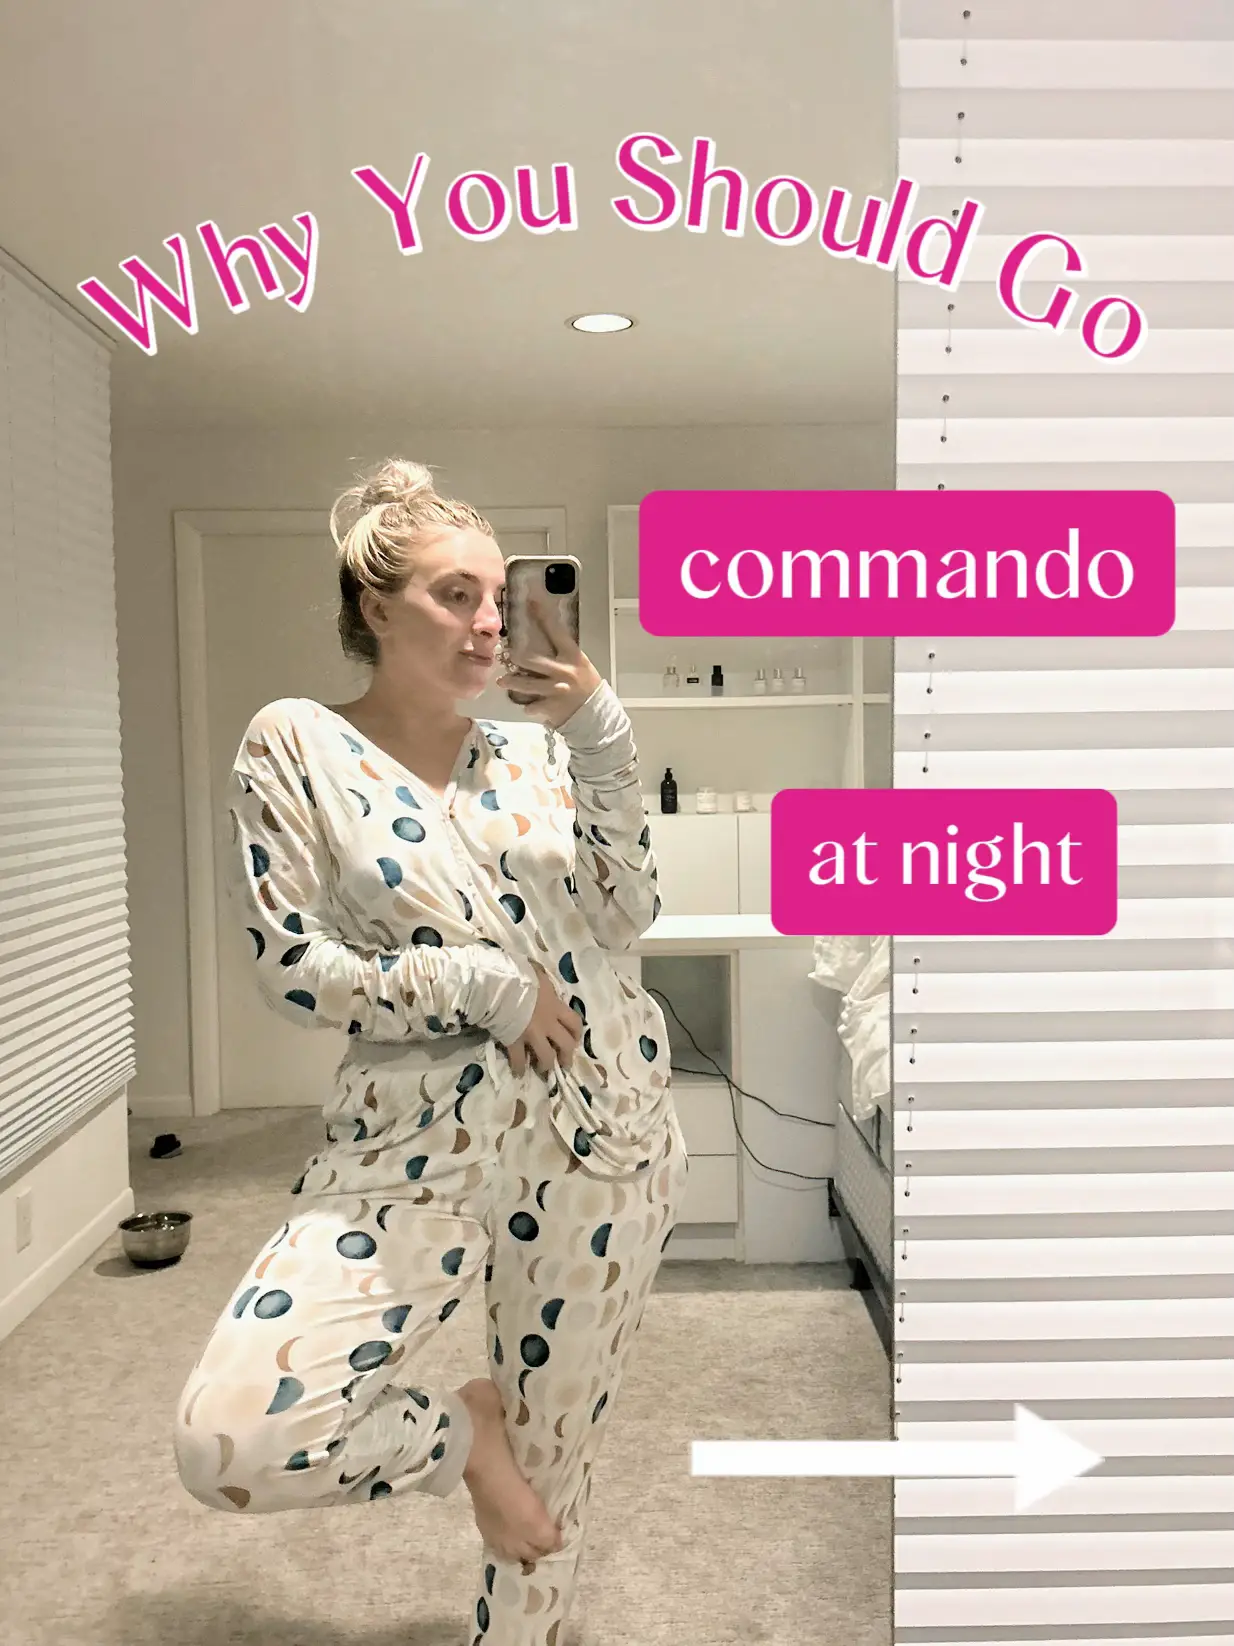 Why You Should Go Commando At Night